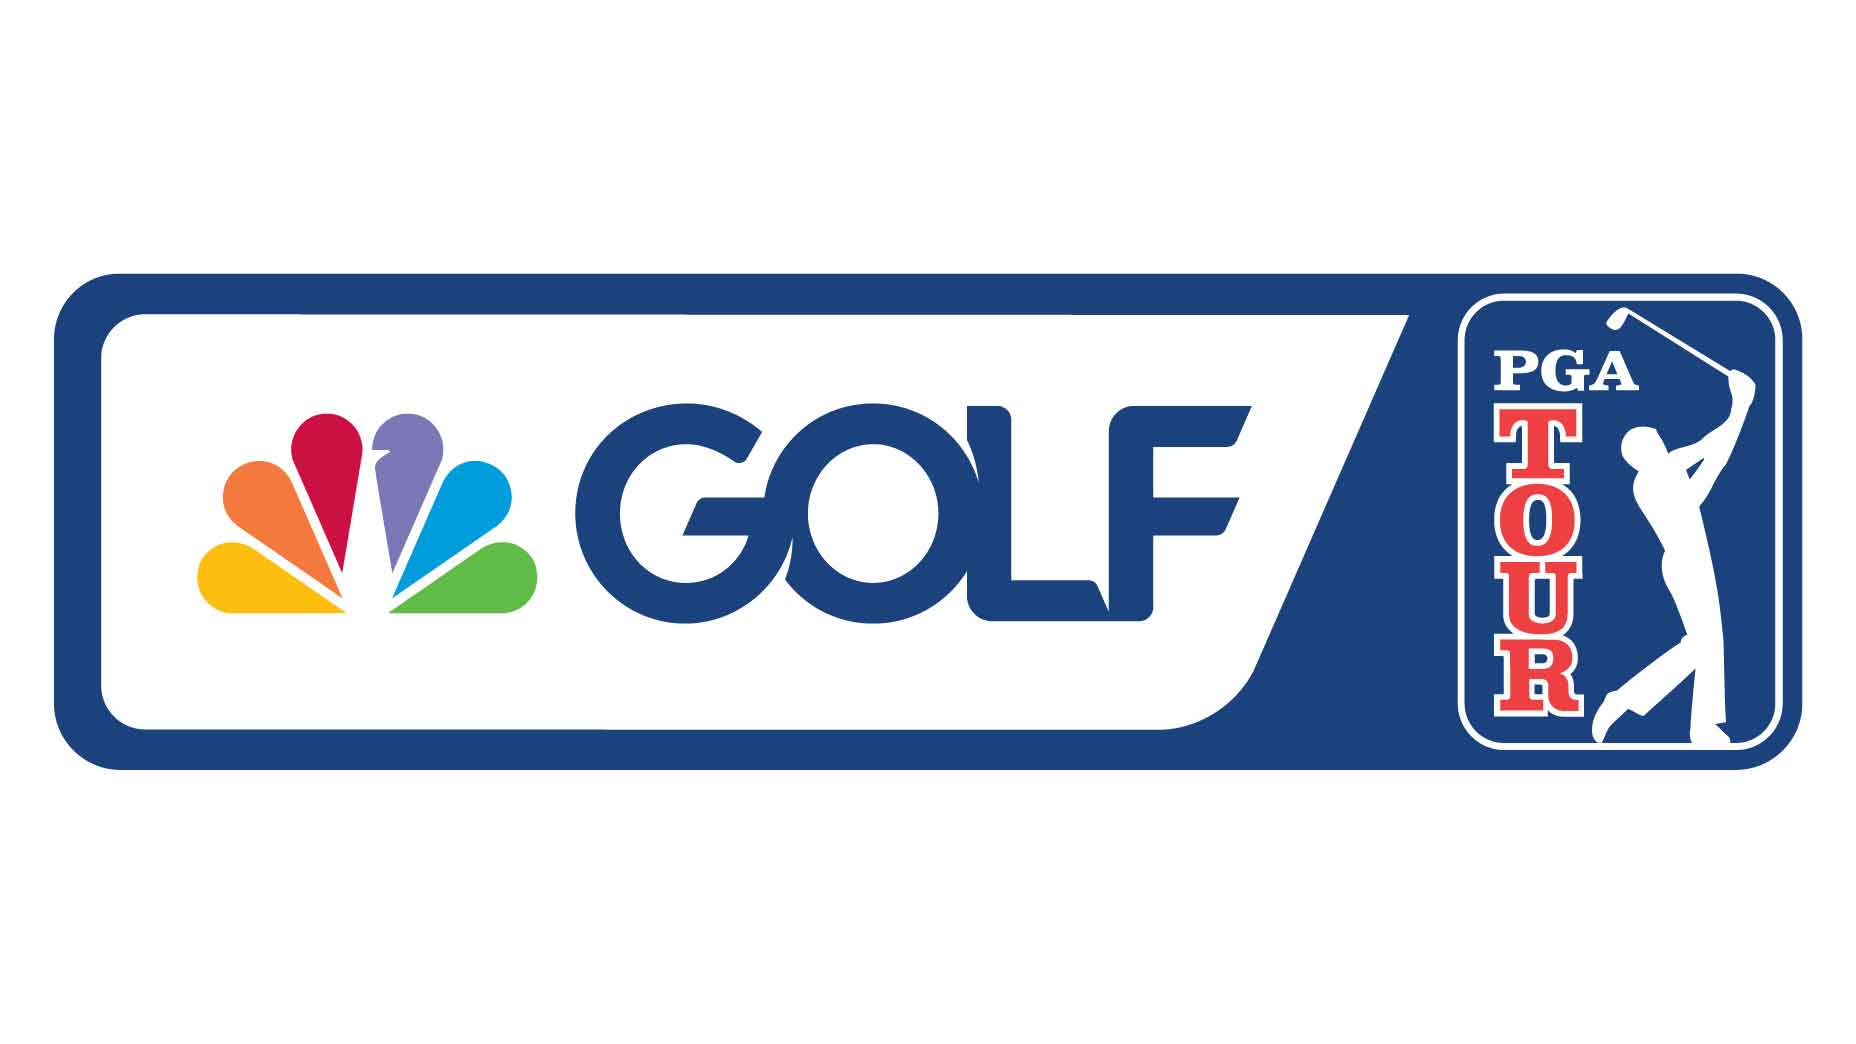 is golf channel owned by pga tour